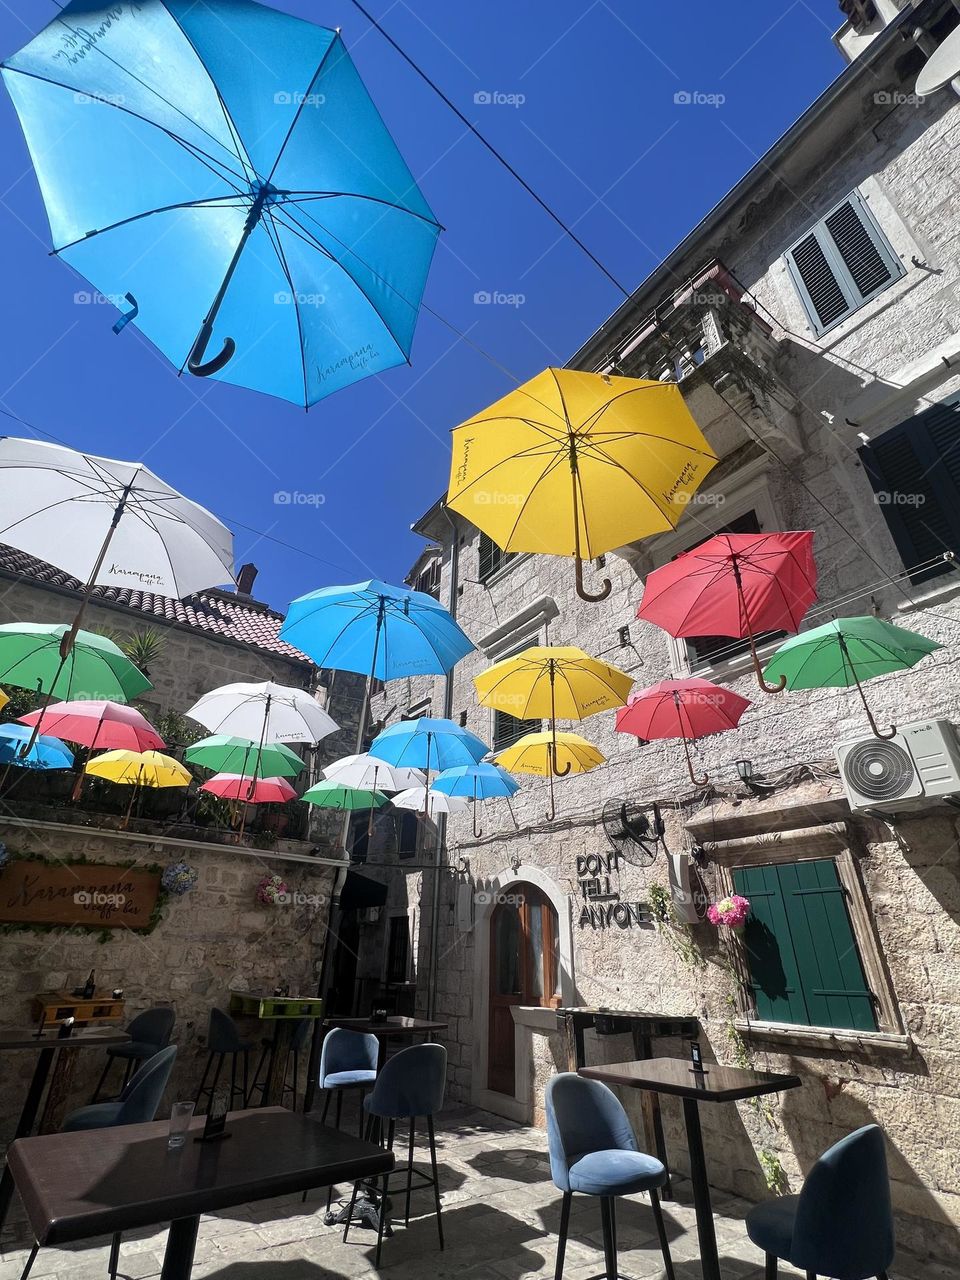 Colorful way to block out the son in Kotor, Montenegro